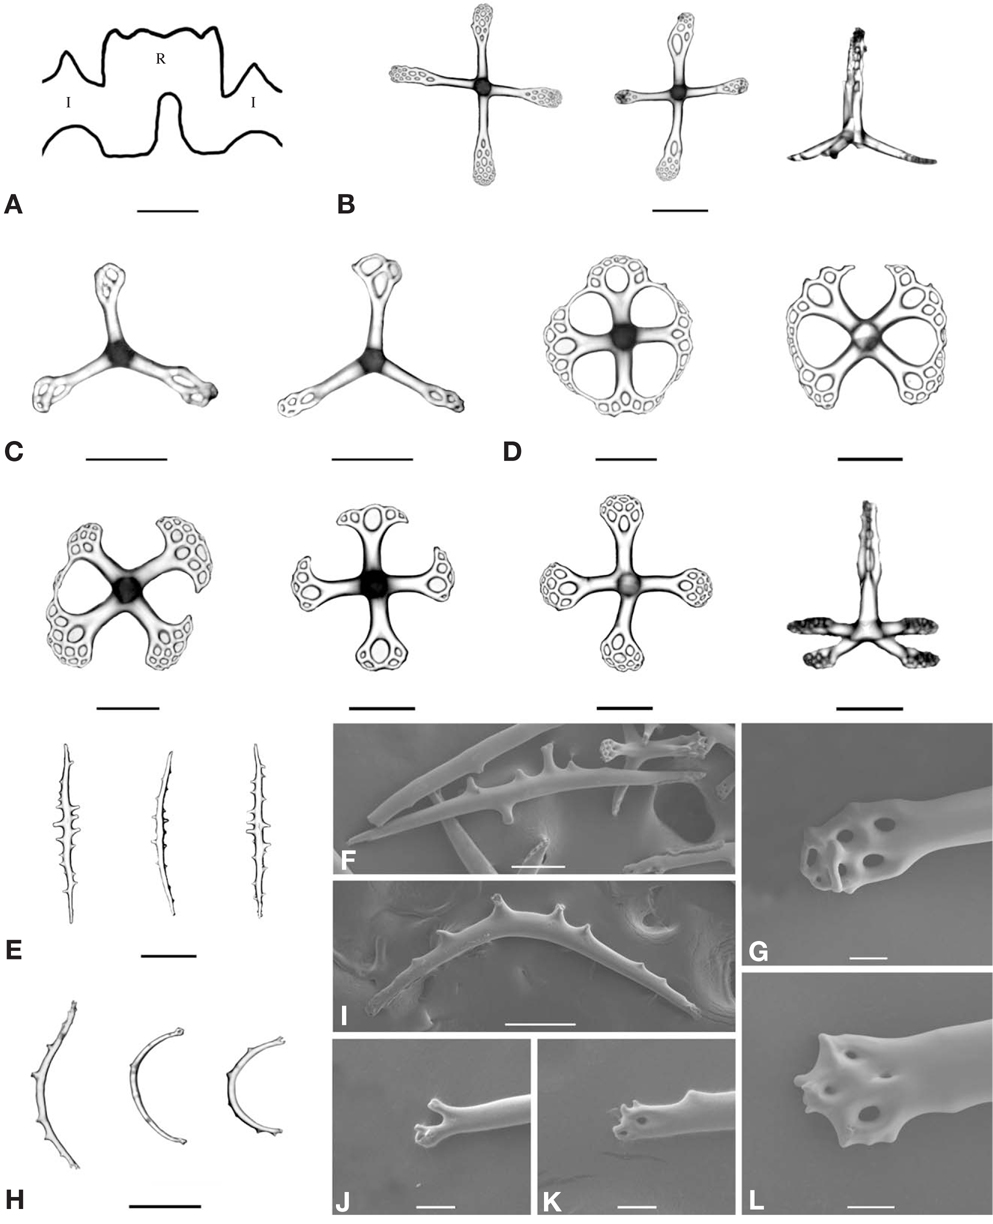 Synallactes nozowai. A, Calcareous ring; B, Table with four-armed disk from dorsal body wall; C, Table with three-armed disk from dorsal body wall; D, Table with four-armed disk from ventral body wall; E, F, Rods of tube feet; G, End of rod of tube feet; H, I, Curved rods of tentacle; J-L, End of curved rod of tentacle. I, interradial; R, radial. Scale bars: A=2 mm, B=200 μm, C-F, H, I=100μm, G, J-L=25μm.